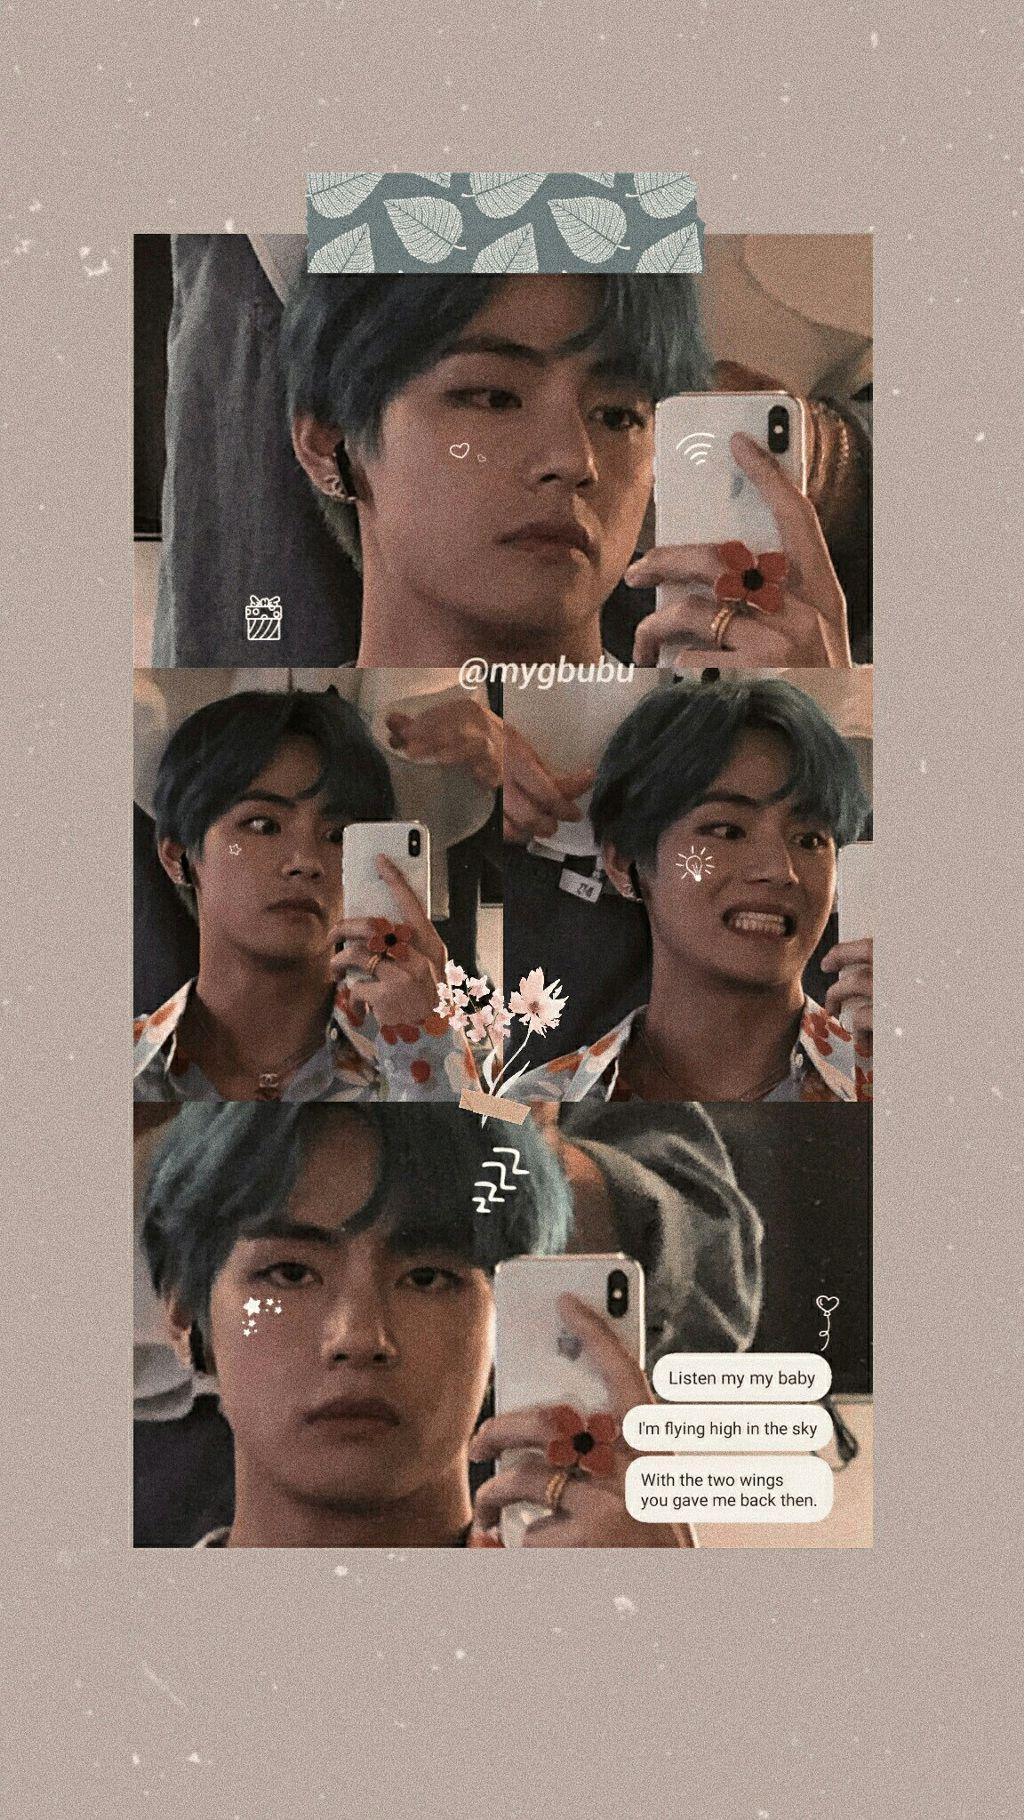 Taehyung Aesthetic Wallpapers Wallpaper Cave